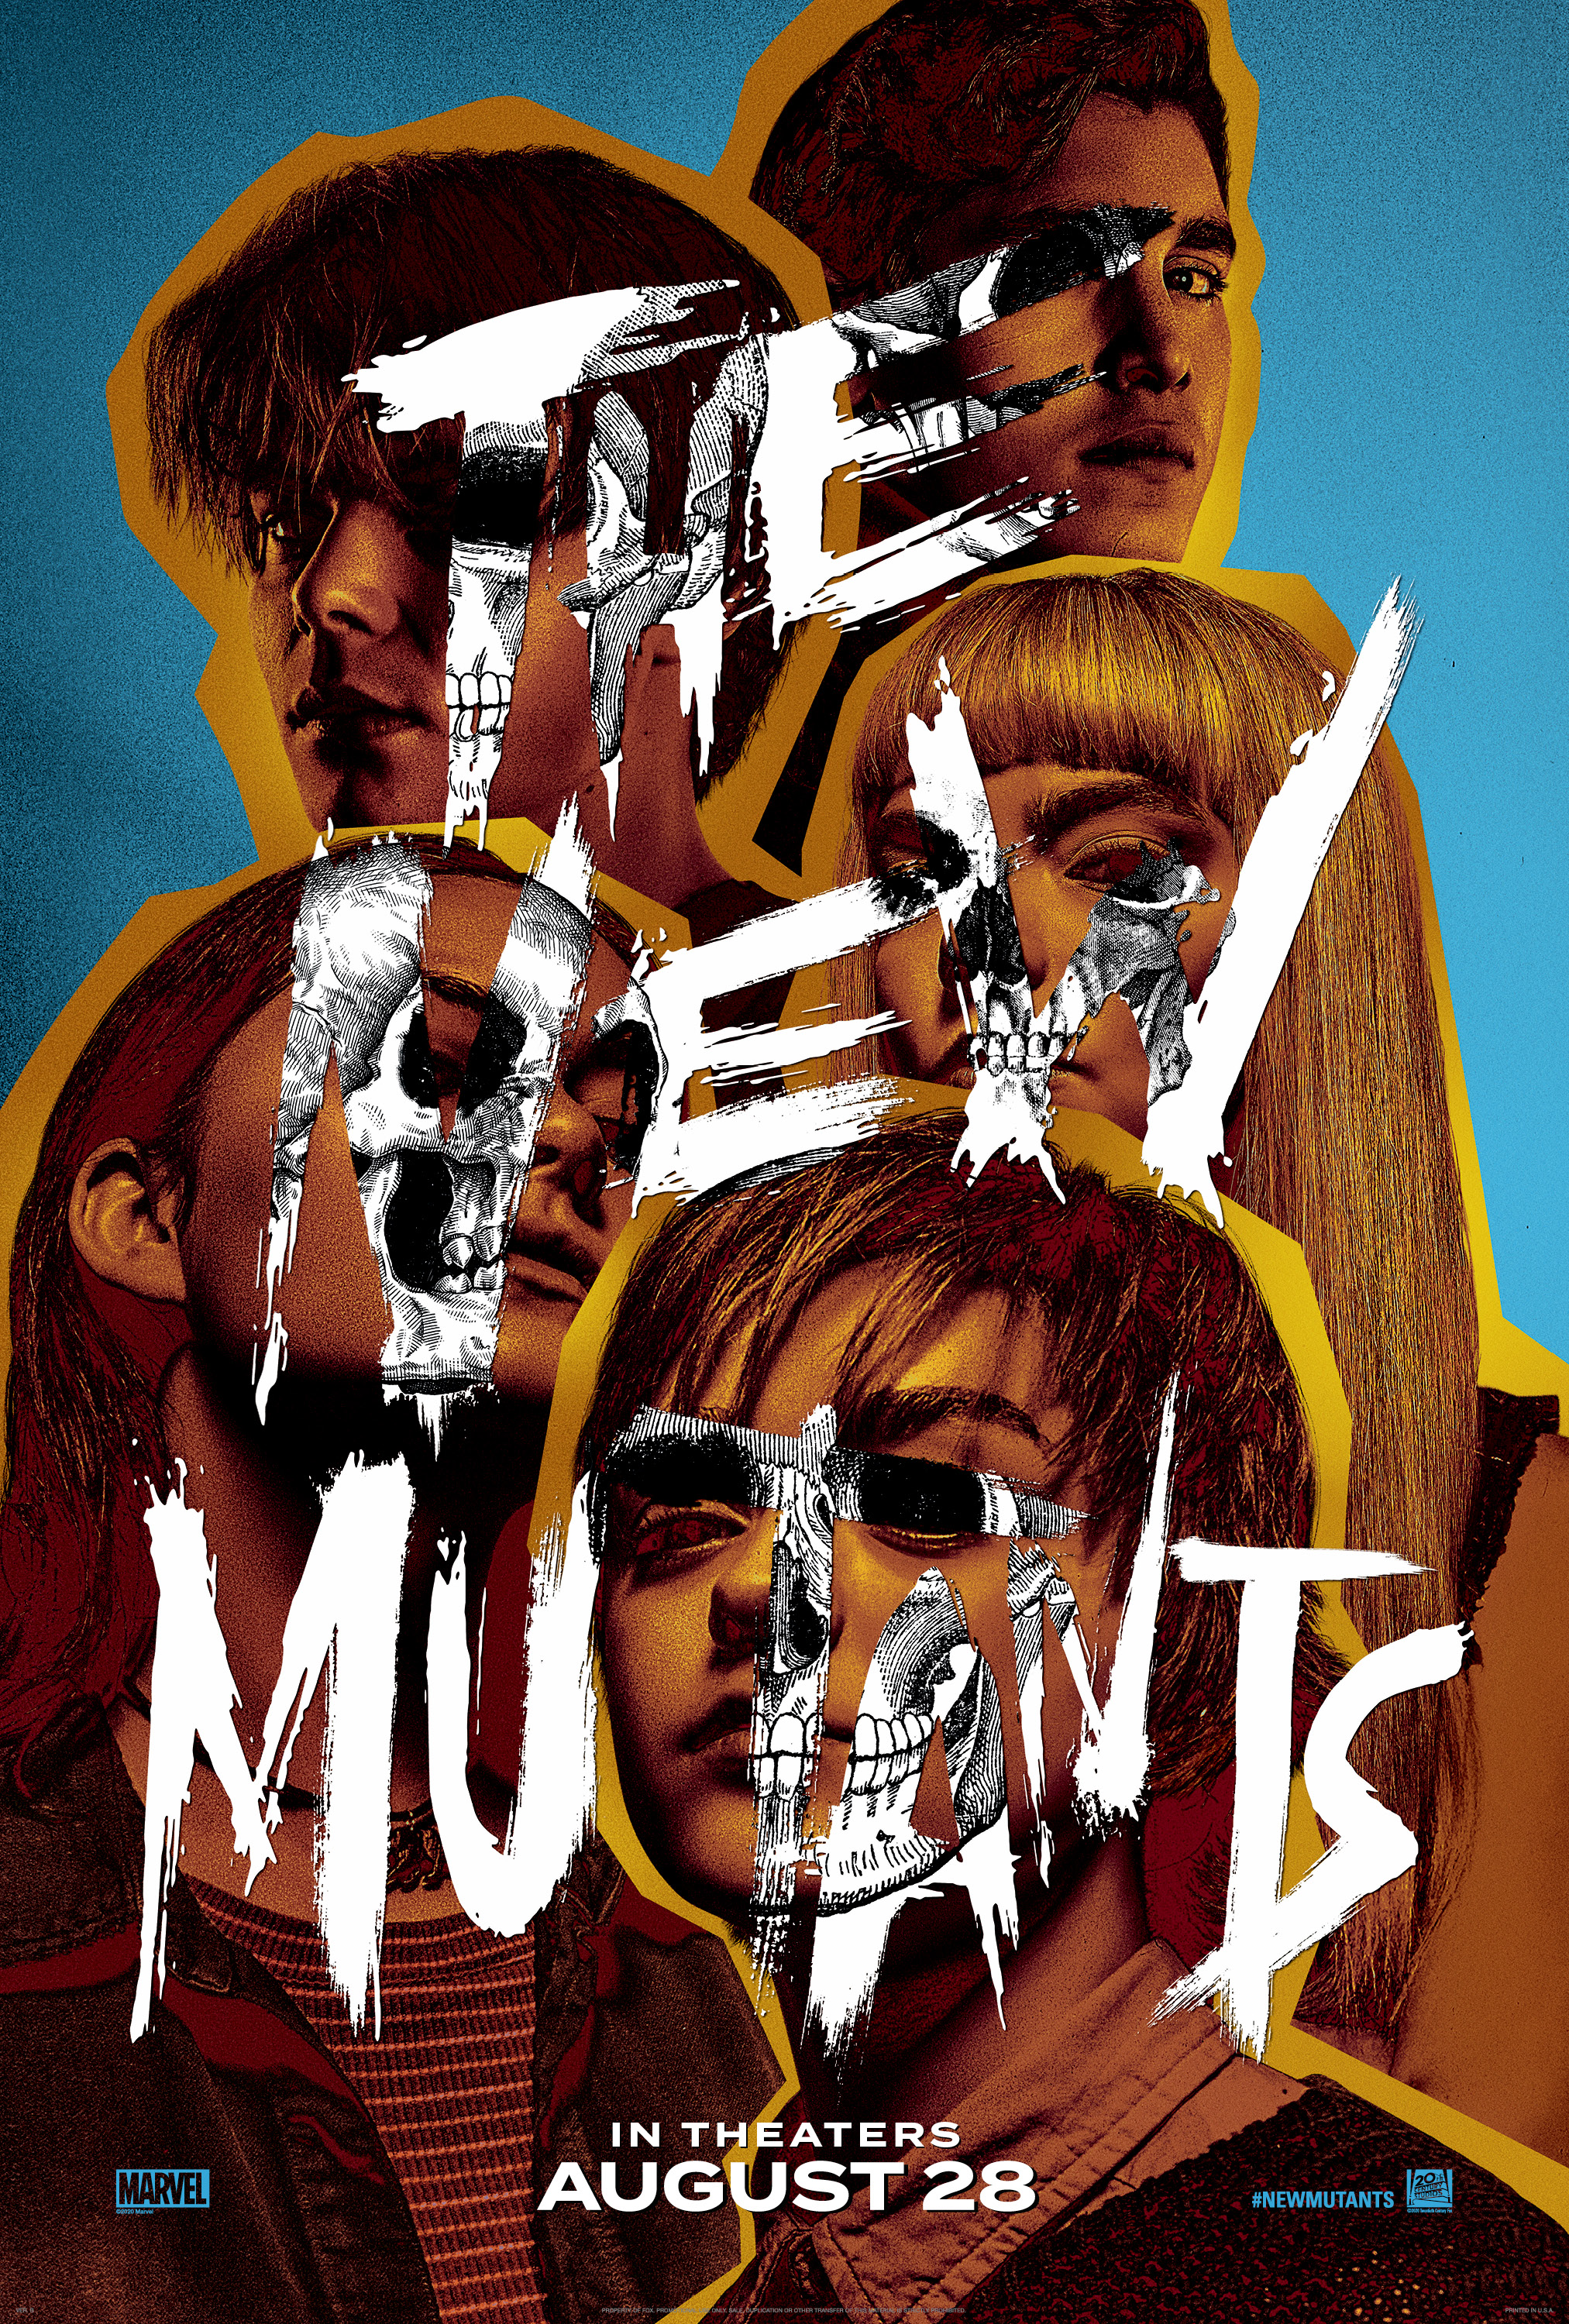 The New Mutants and Its Nightmare on Elm Street Influences